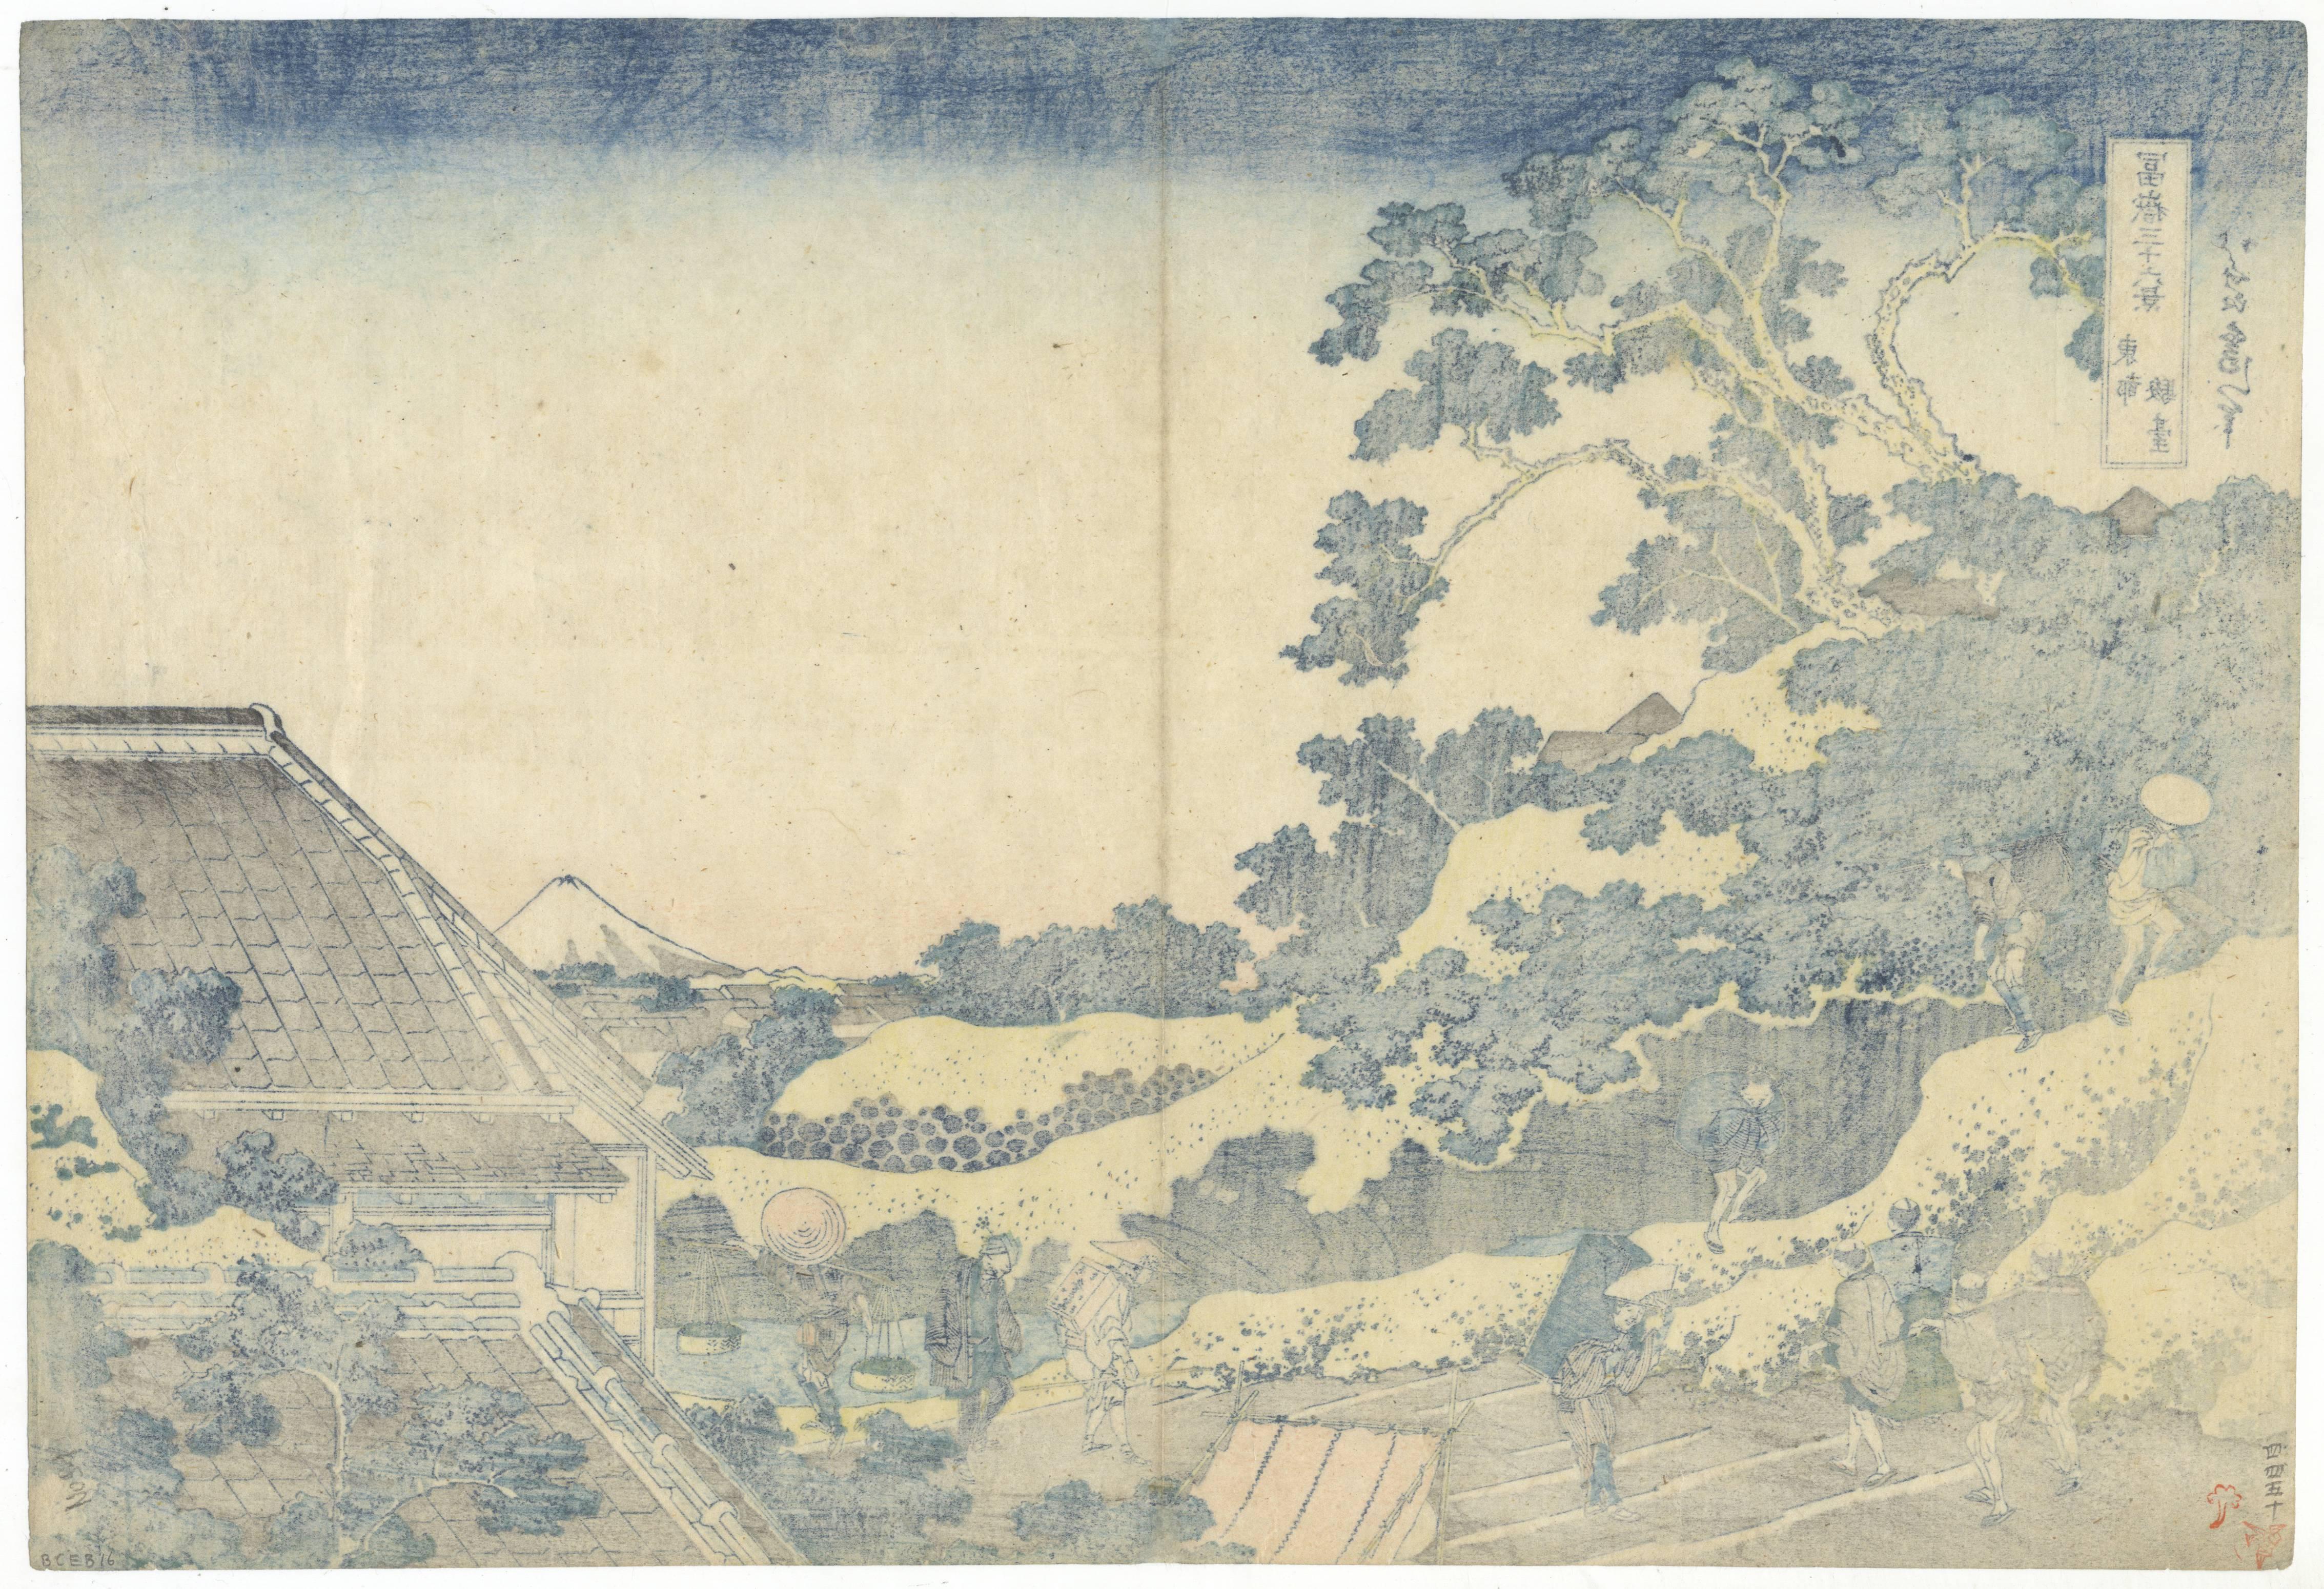 Artist: Katsushika Hokusai (1760 - 1849)
Title: Sundai in Edo
Series: Thirty-six Views of Mount Fuji
Publisher: Nishimura Yohachi
Published: circa 1831-1835

The blue outline designates this print as one of the earliest ones to have been printed of